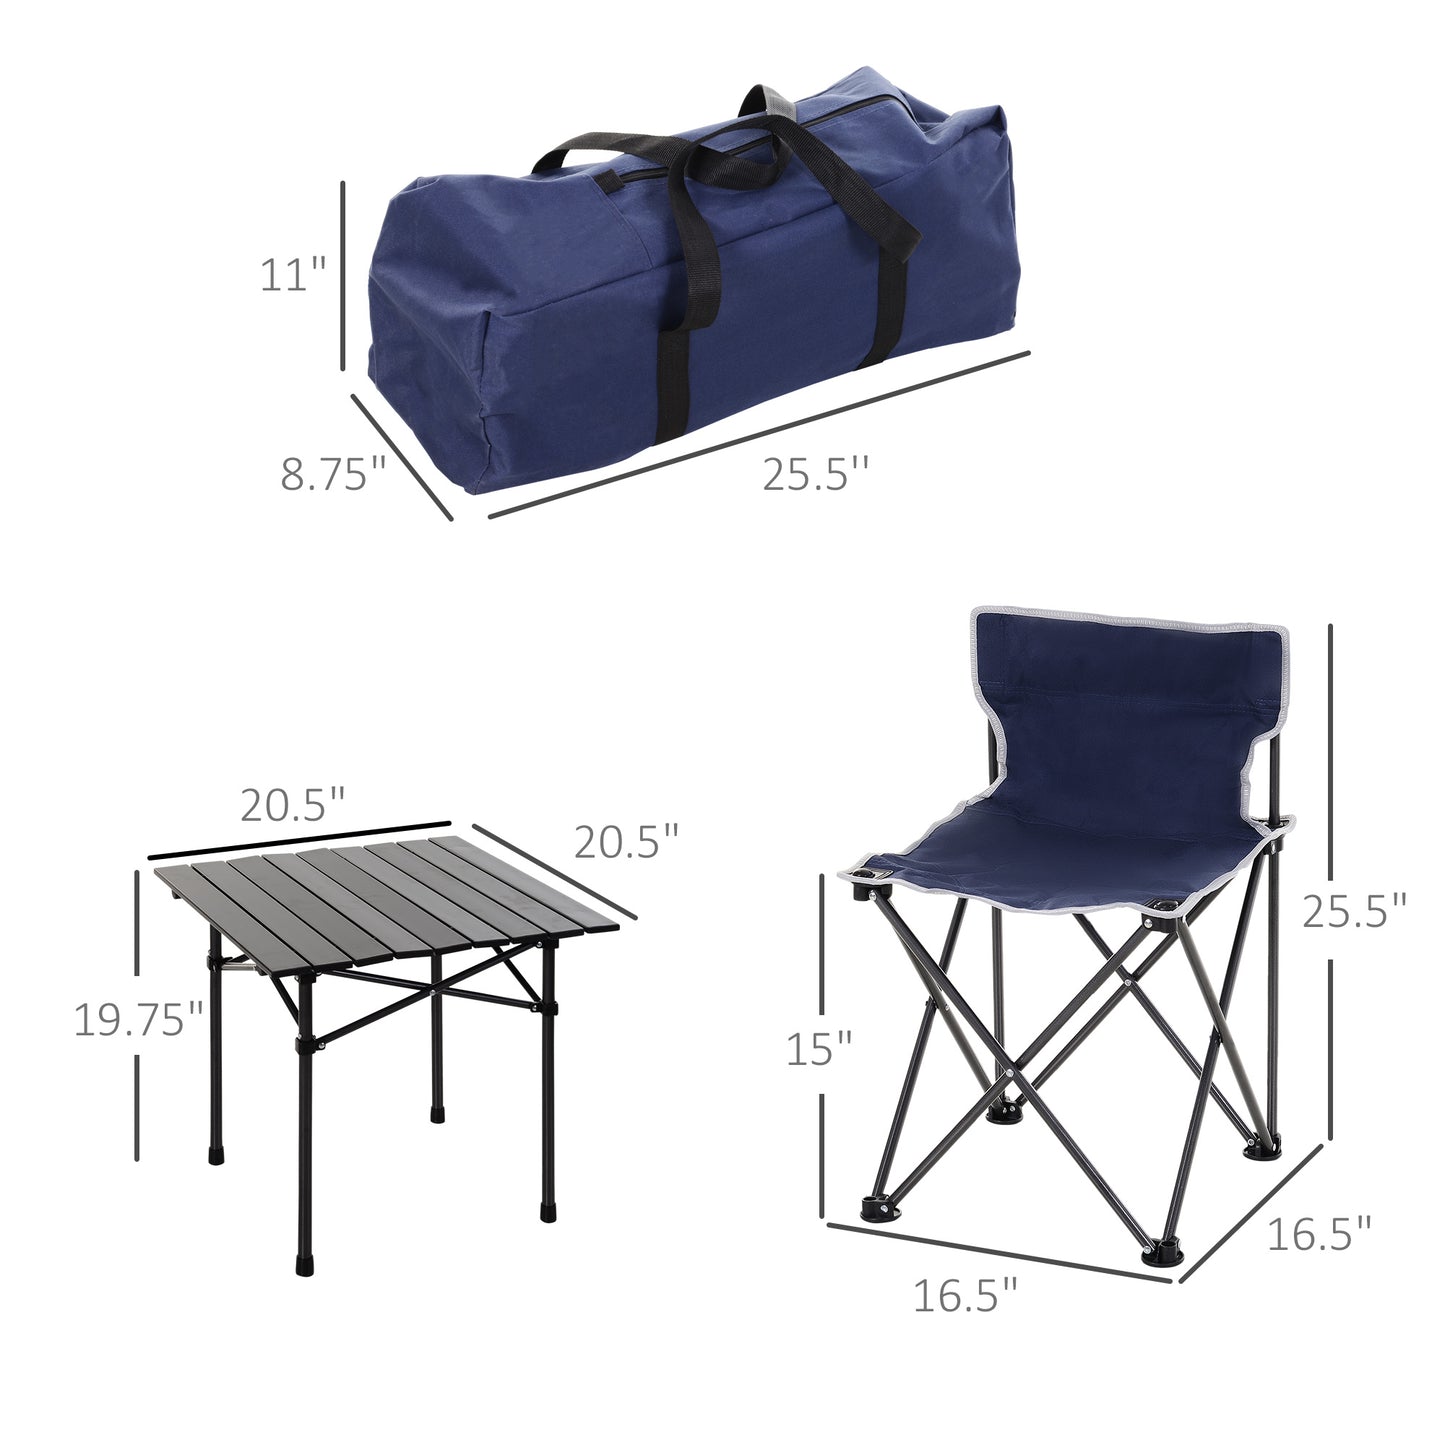 Portable Picnic Table with 4 Stools and Carry Bag, Folding Camping Table and Chairs Set w/ Aluminum Roll-up Tabletop for Indoor Outdoor Travel Party BBQ at Gallery Canada